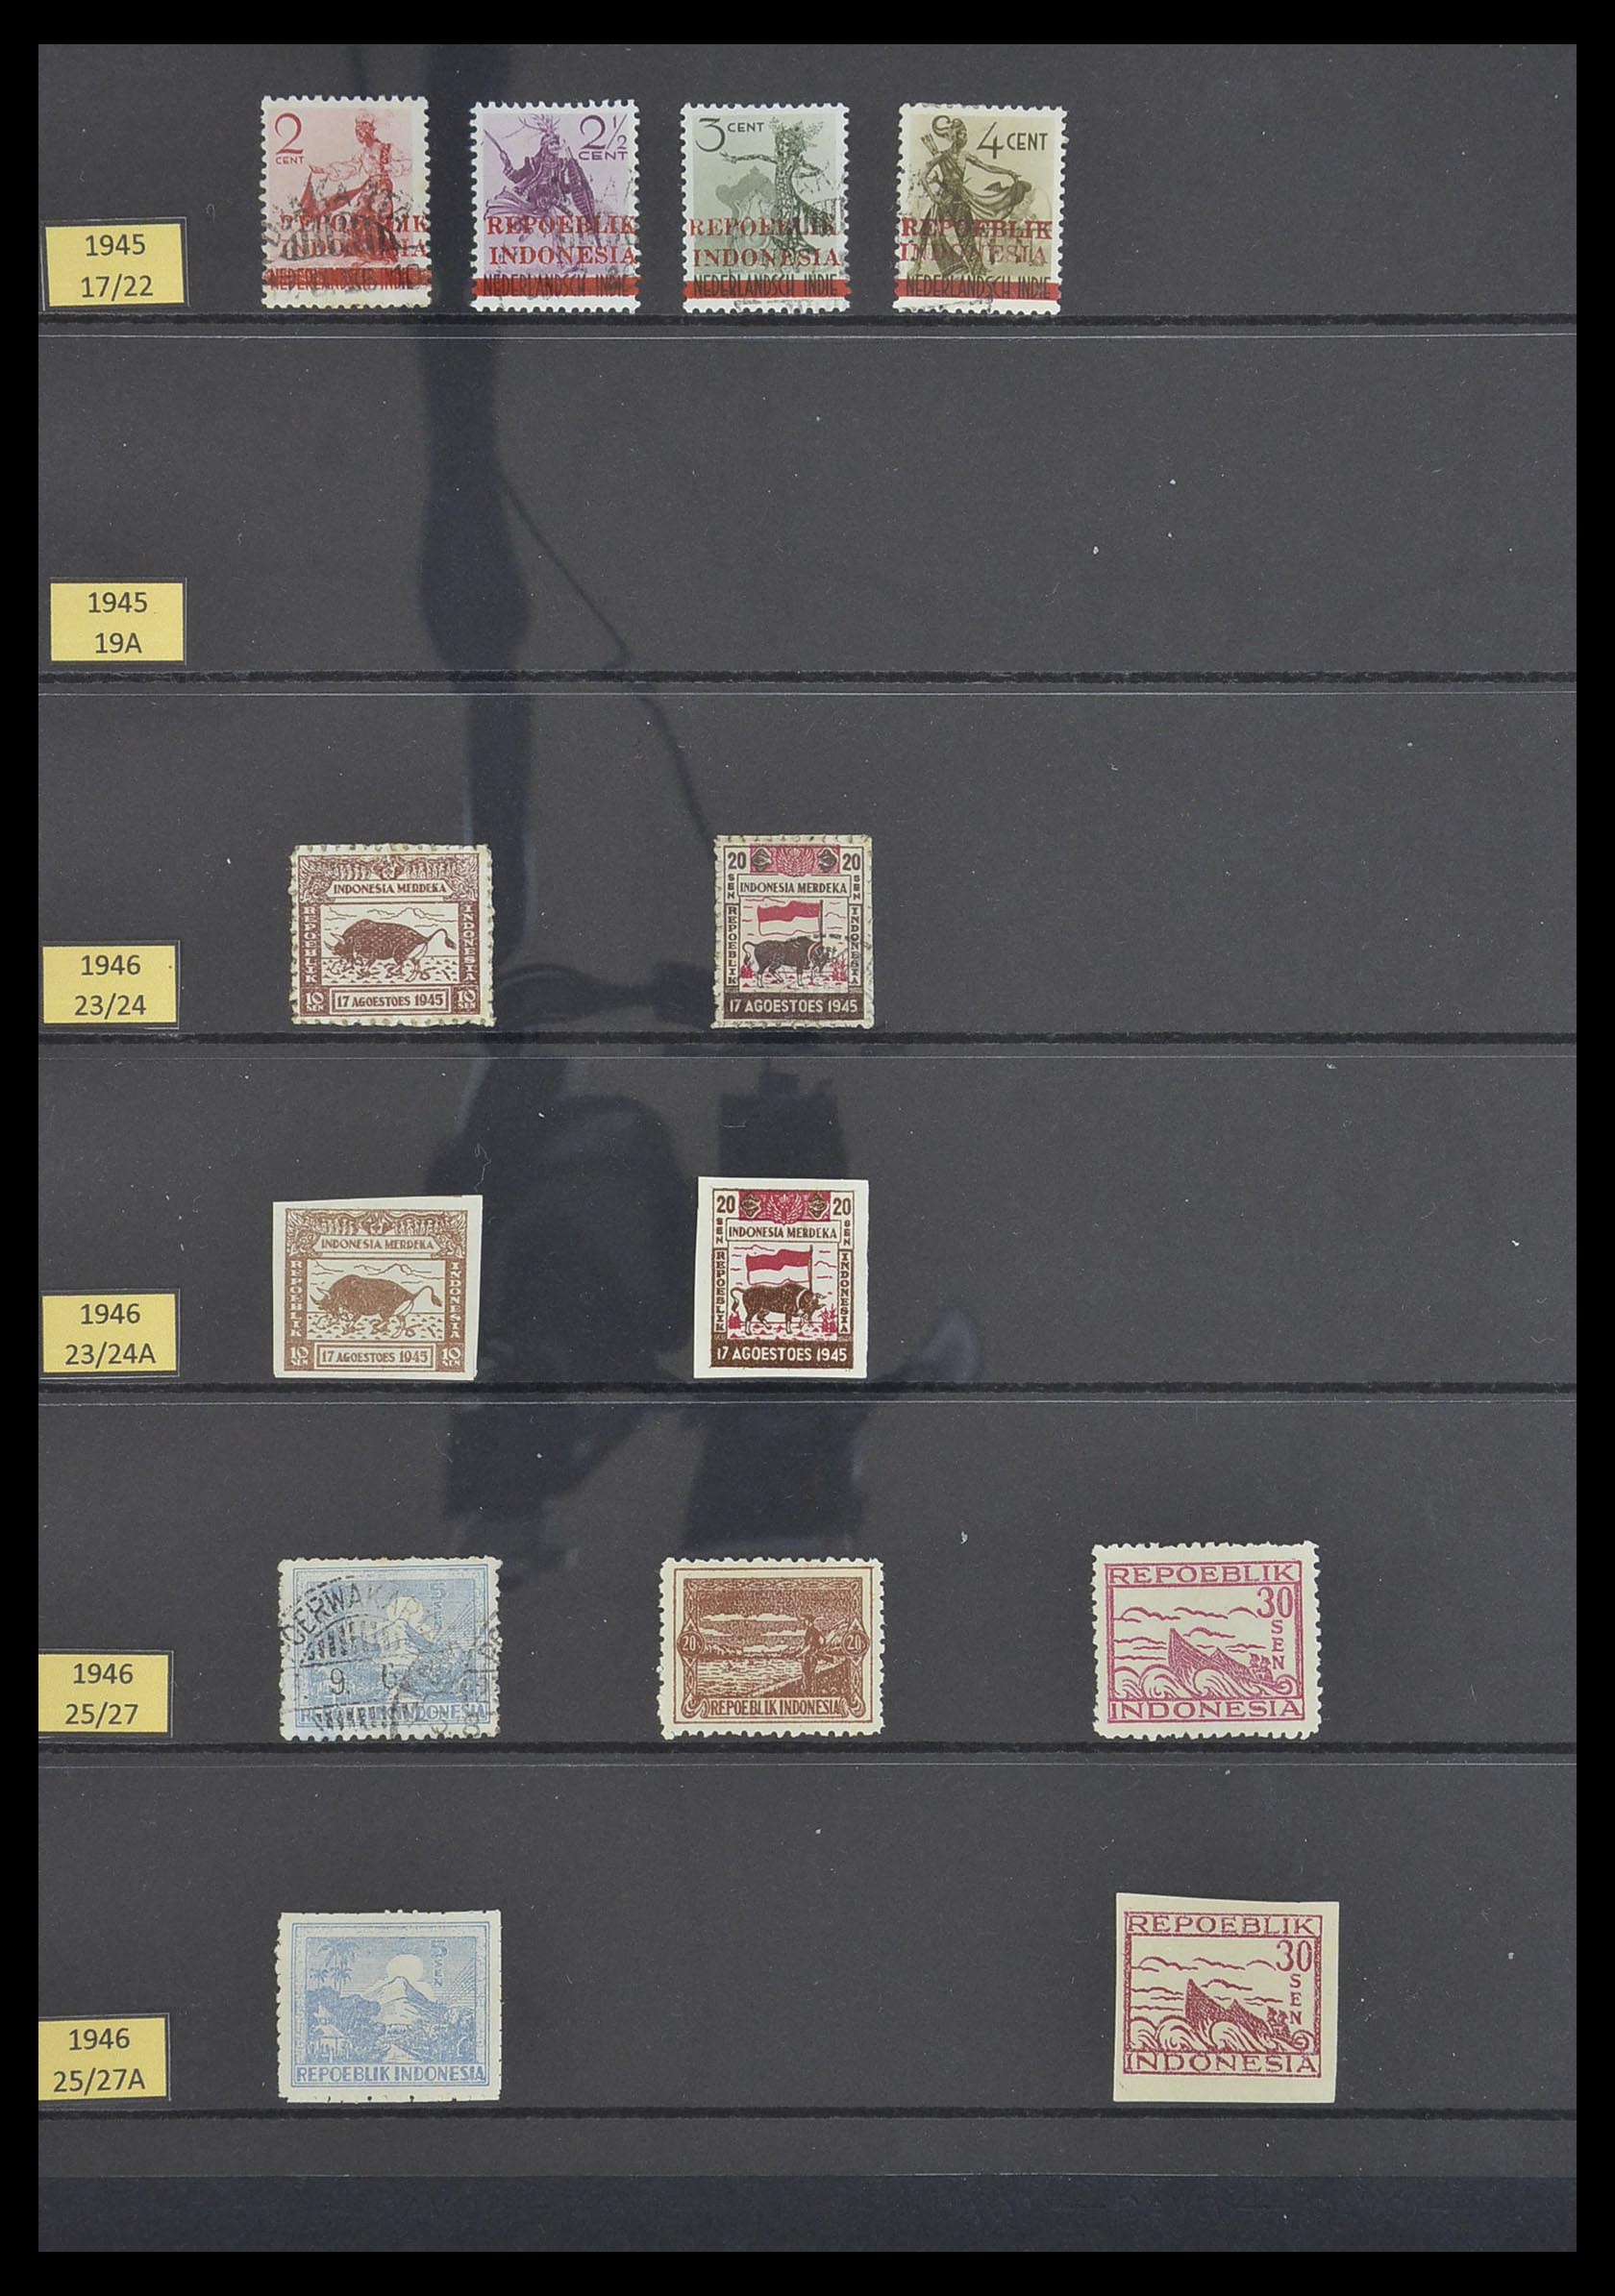 33483 002 - Stamp collection 33483 Indonesia 1945-1999.